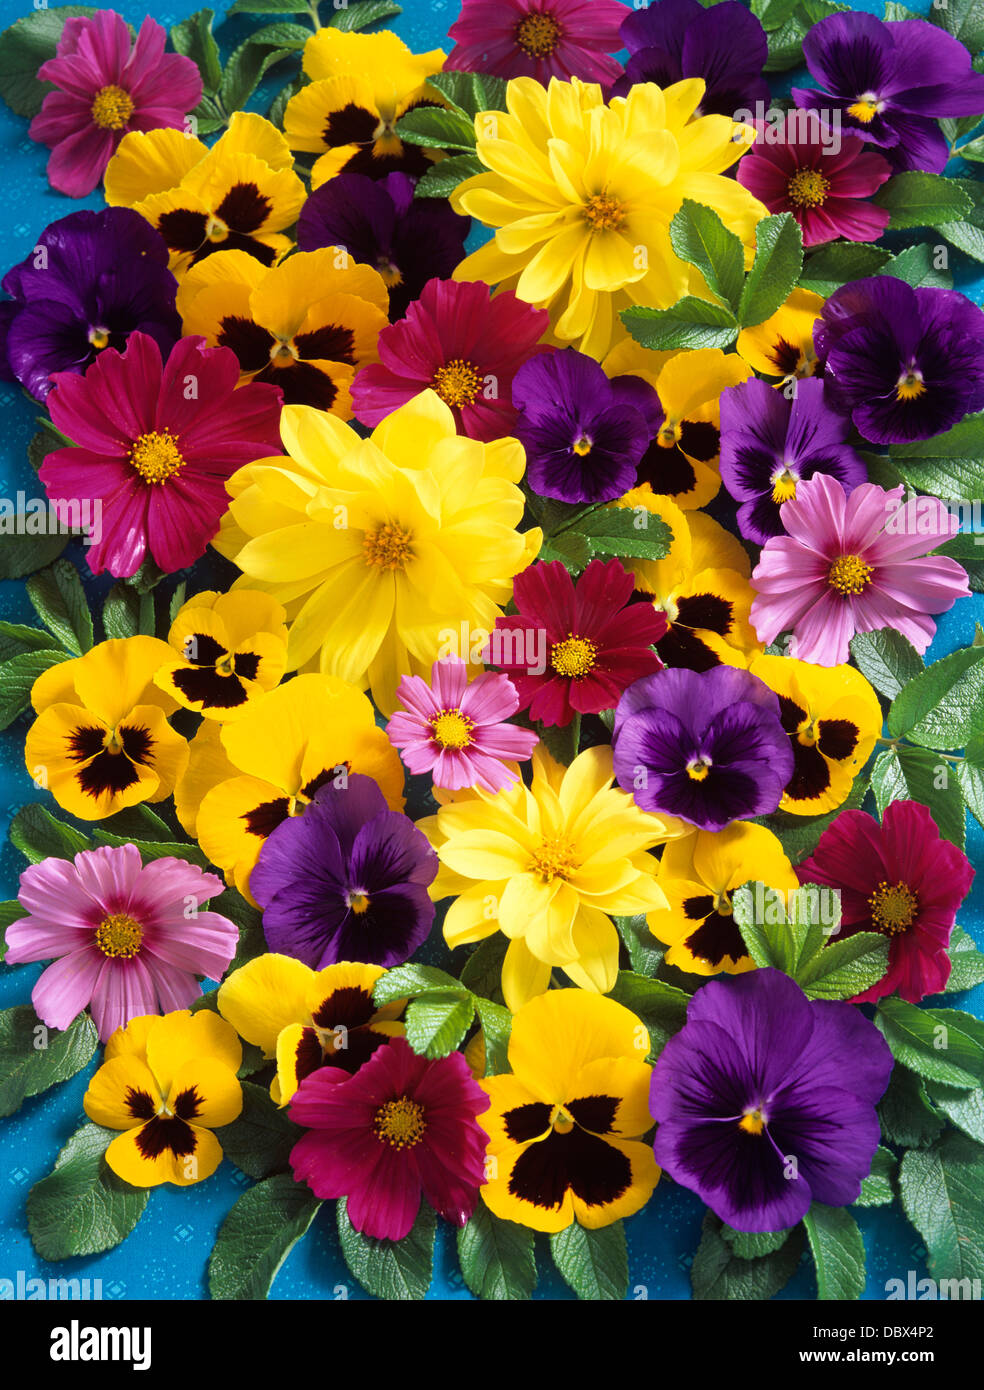 FLOWER COLLAGE PURPLE AND YELLOW PANSIES CORESPOSI AND DAISIES Stock Photo